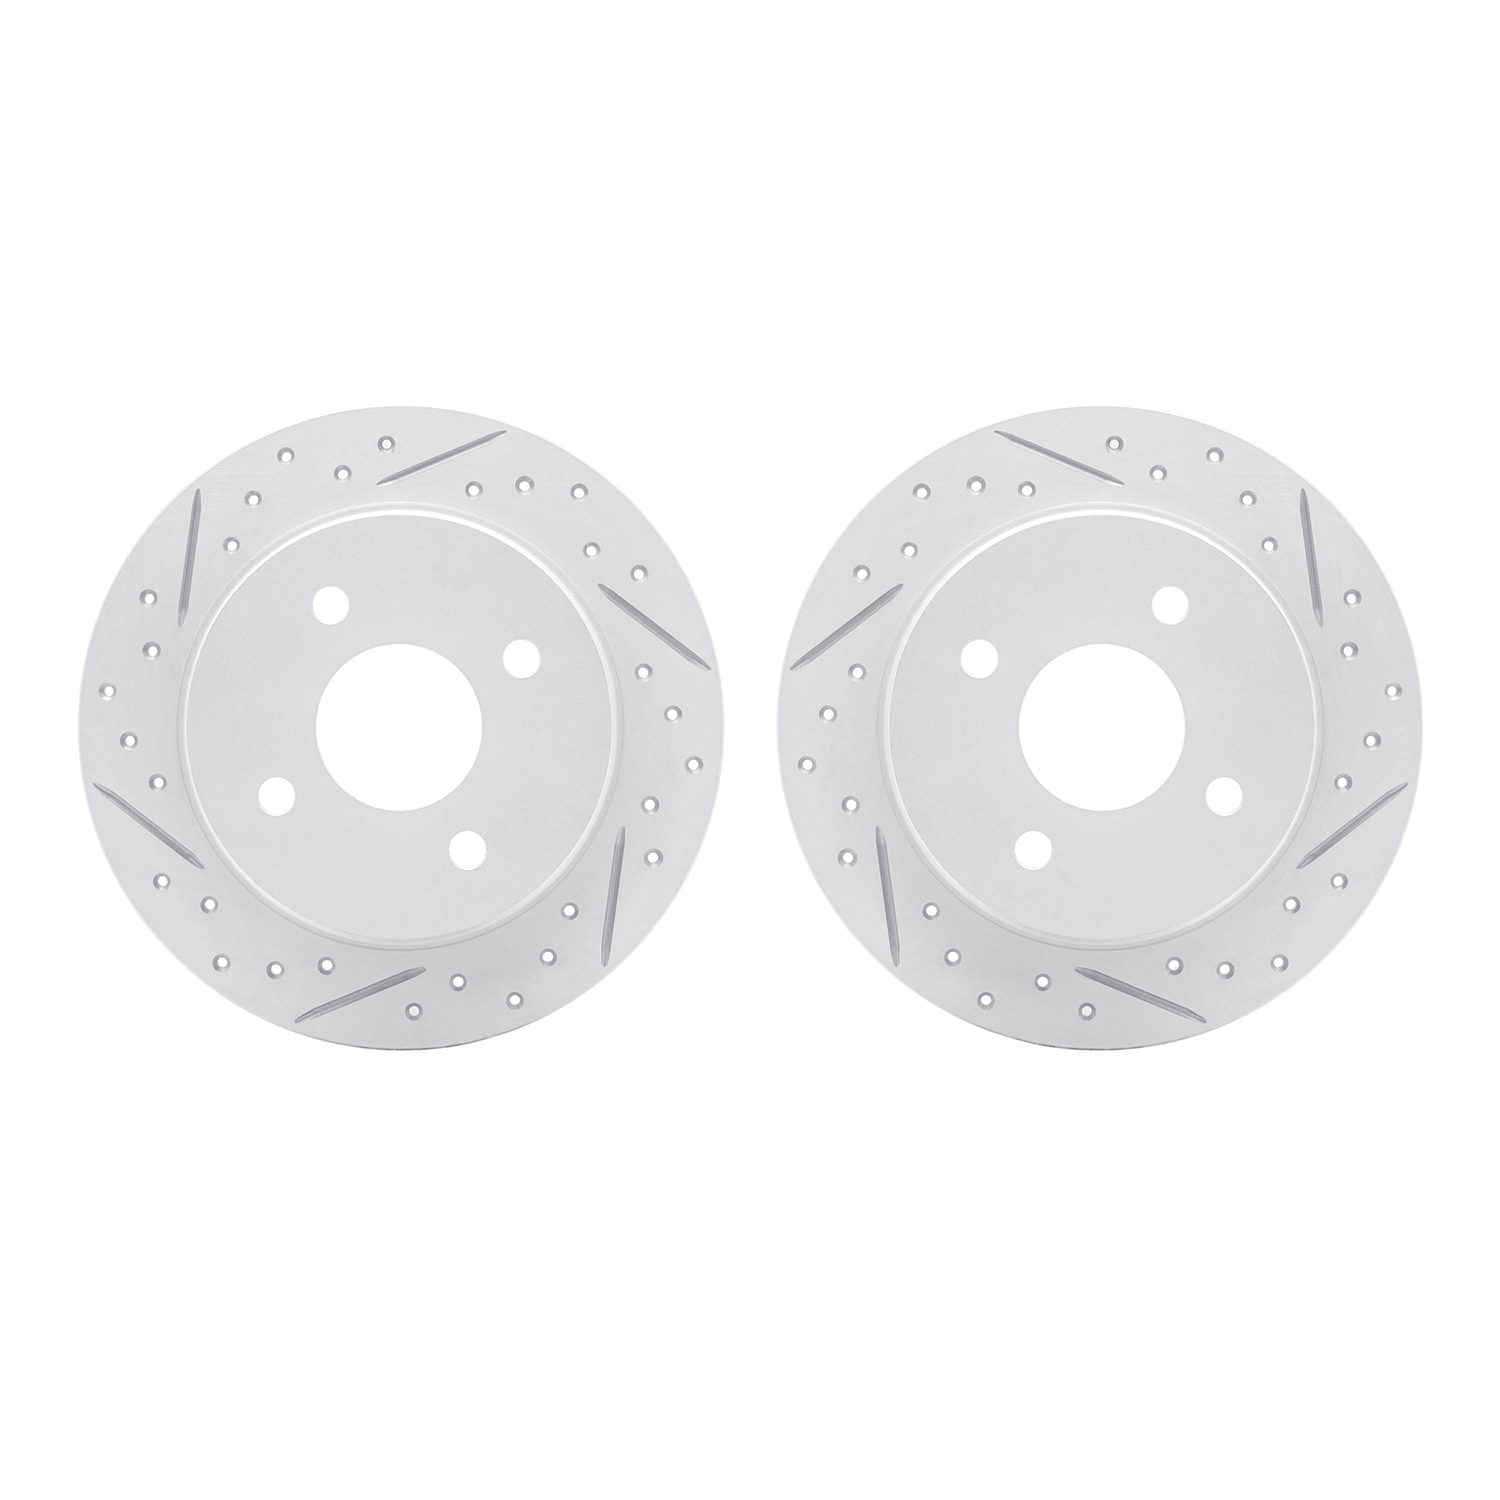 2002-54158 Geoperformance Drilled/Slotted Brake Rotors, 2001-2019 Ford/Lincoln/Mercury/Mazda, Position: Rear